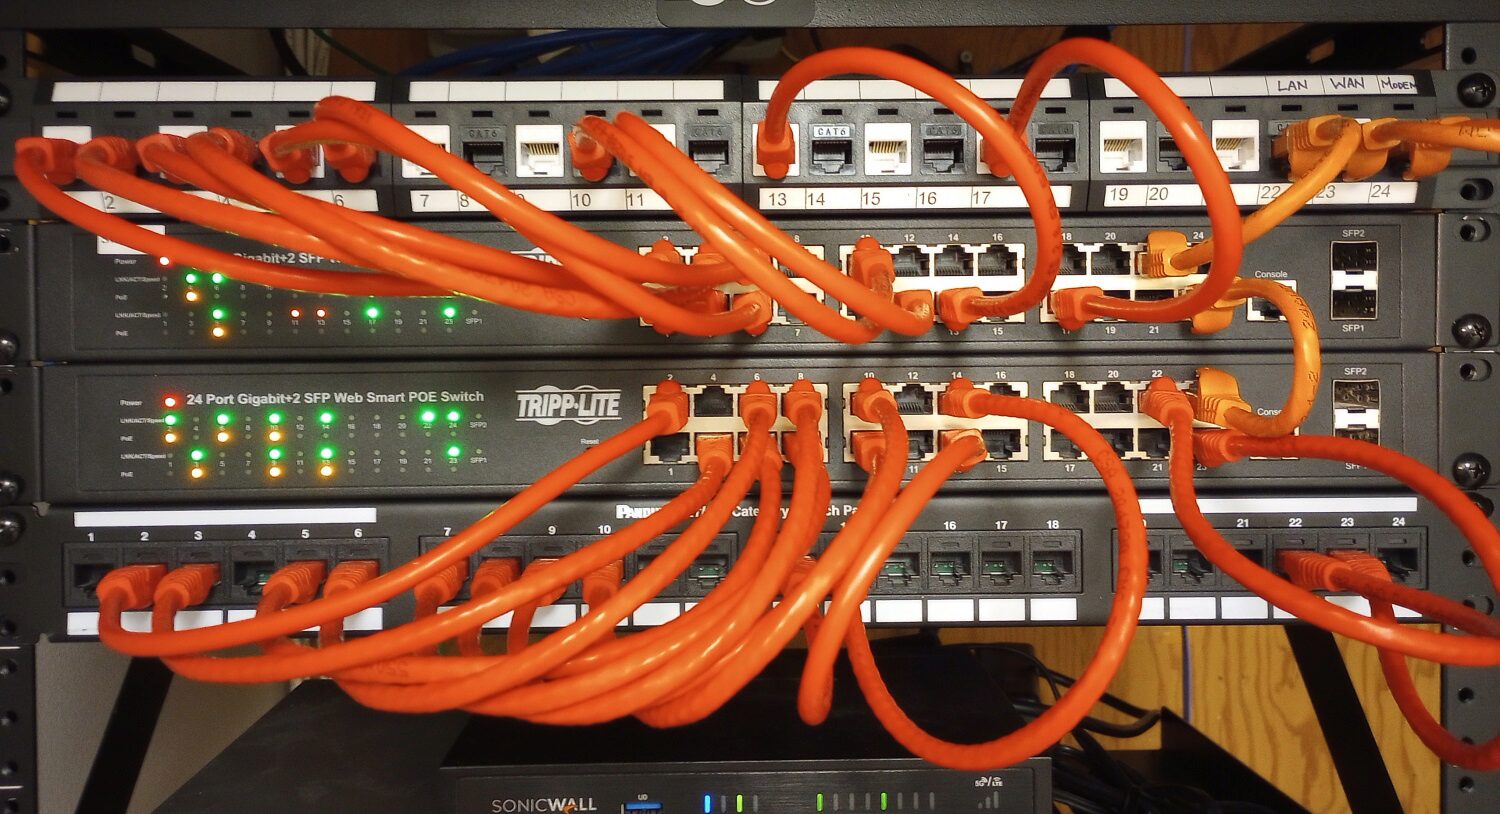 Network rack with patch panels and patch cables